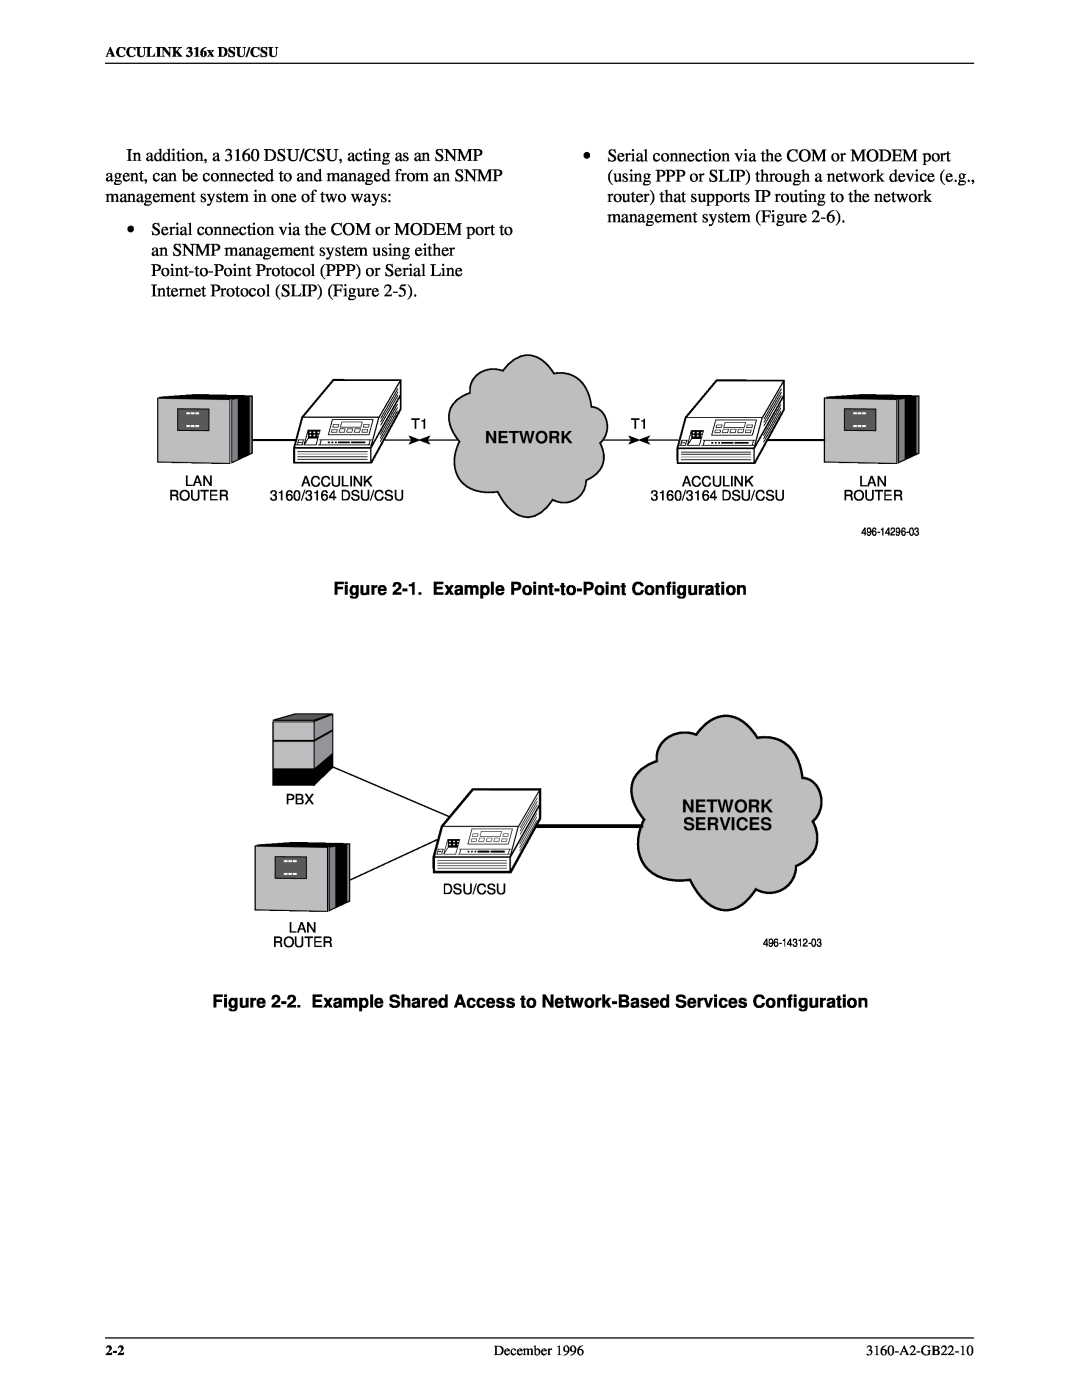 Paradyne 316x manual Network, 1. Example Point-to-Point Configuration, Services 